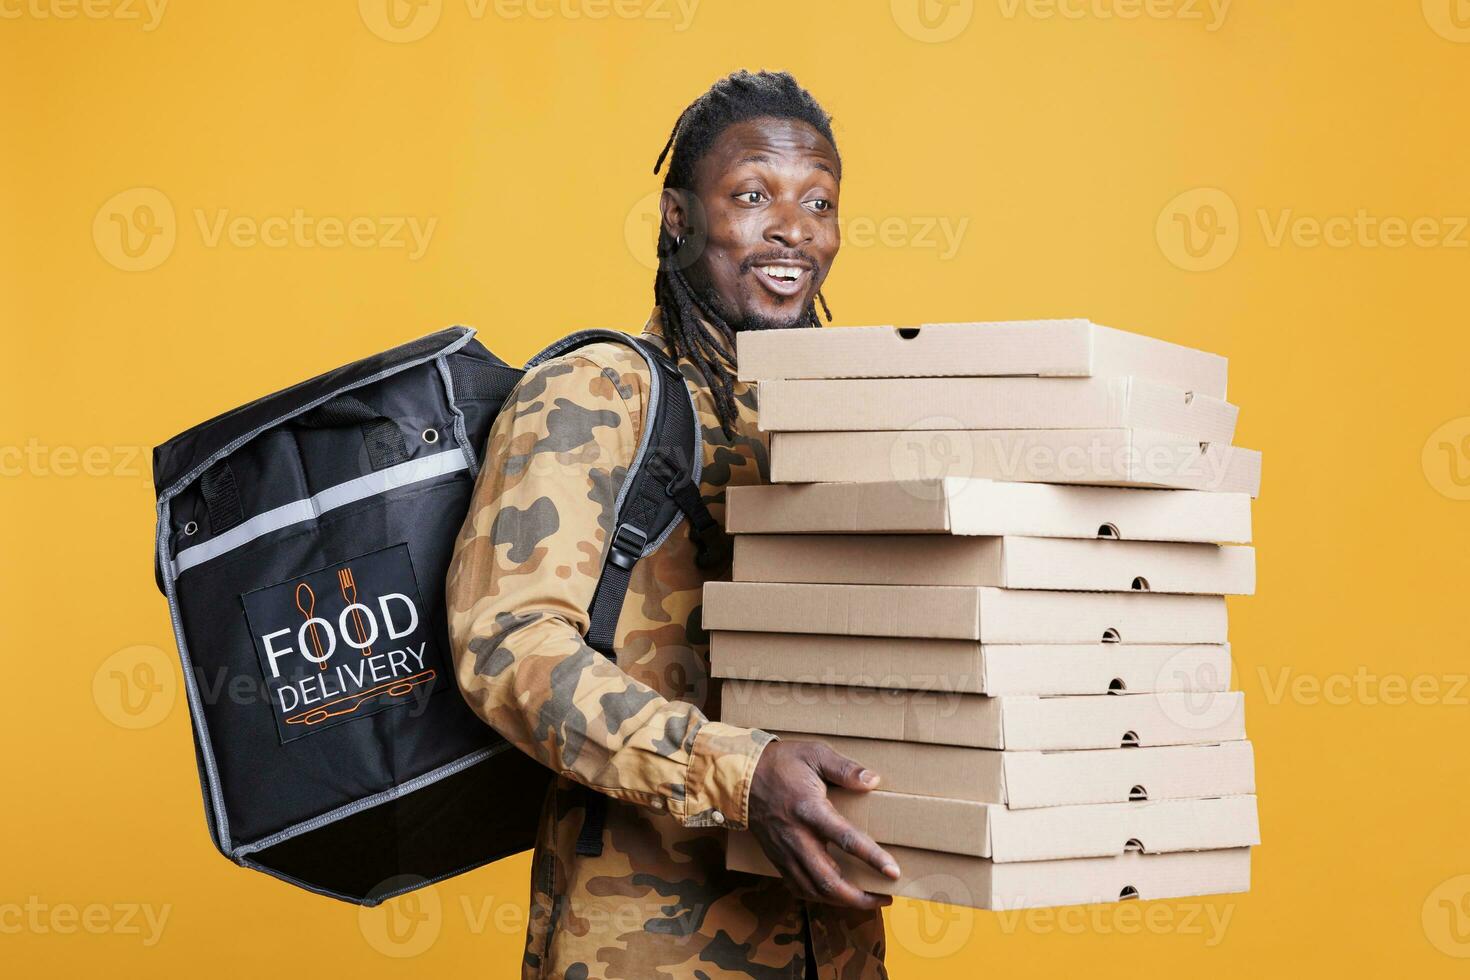 Pizzeria delivery employee holding cardboard stack full with pizza, delivering takeaway food order to client during lunch time. African american deliveryman carrying thermal backpack in studio photo